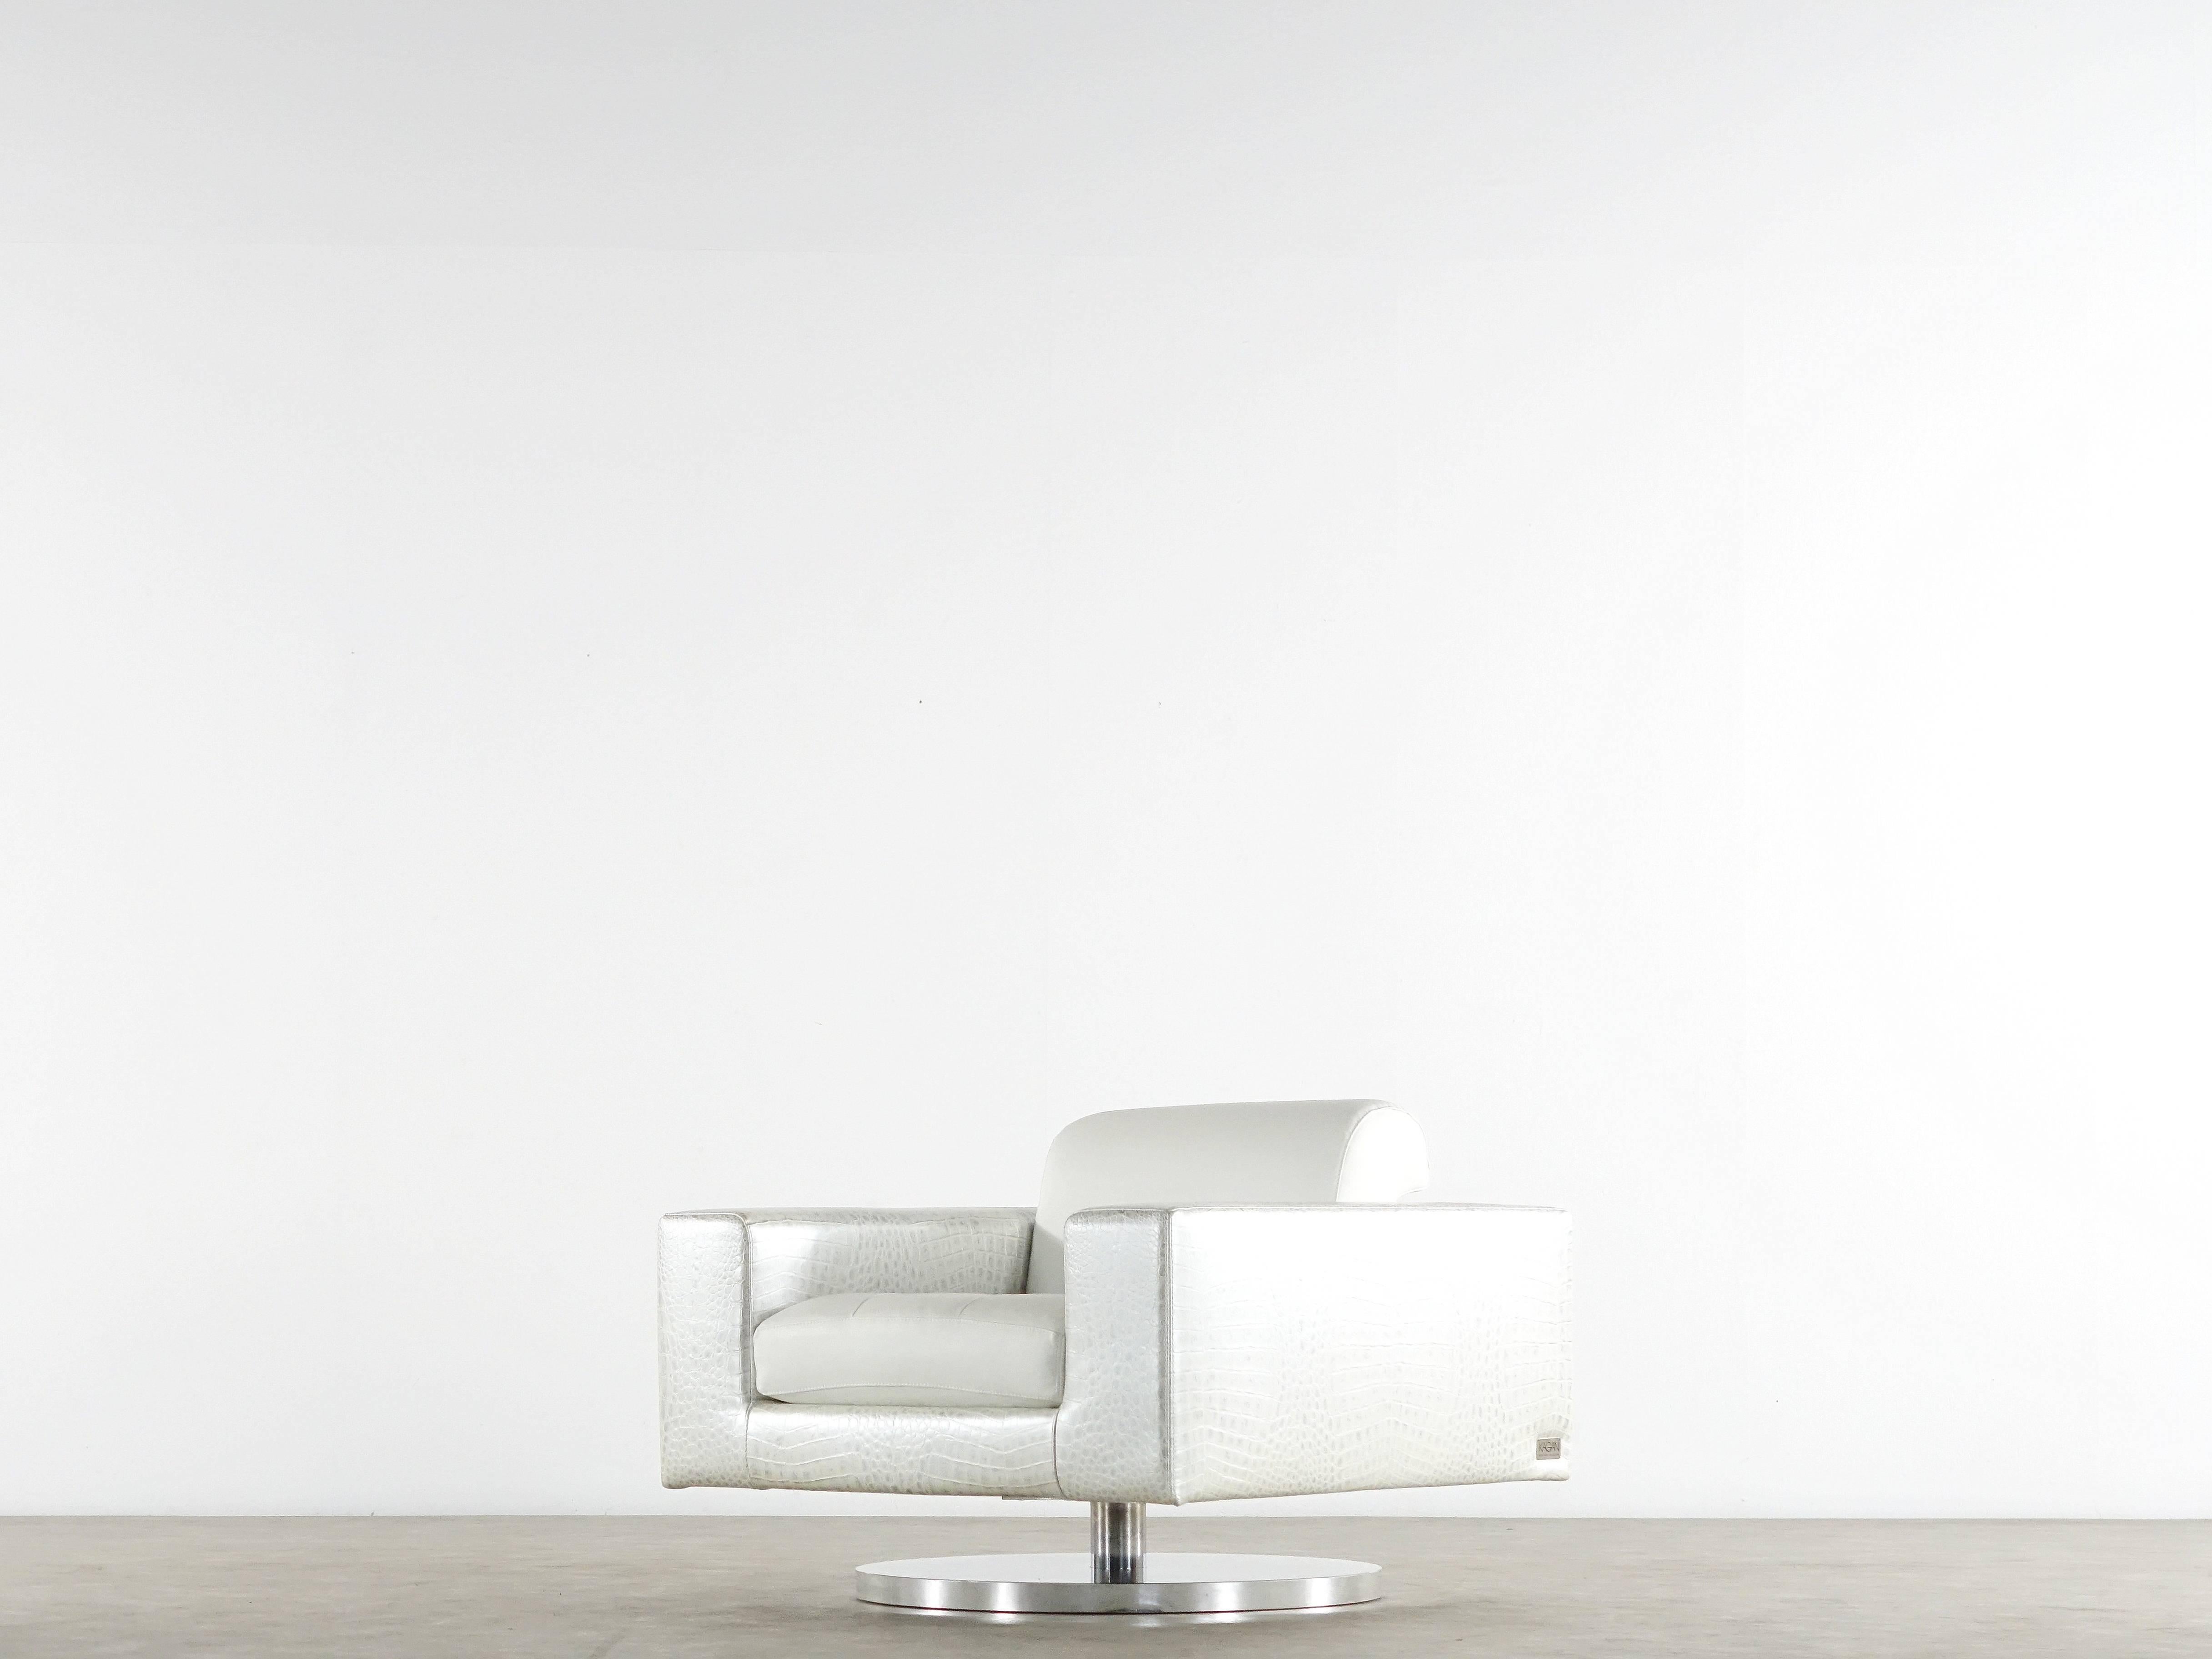 Extremely comfortable and minimalistic lounge chair by Vladimir Kagan and Fendi cooperation, New York collection for Directional.

The leather sides are made of kroko, marked white and silver,
the seating face and armrest are smooth, perfect